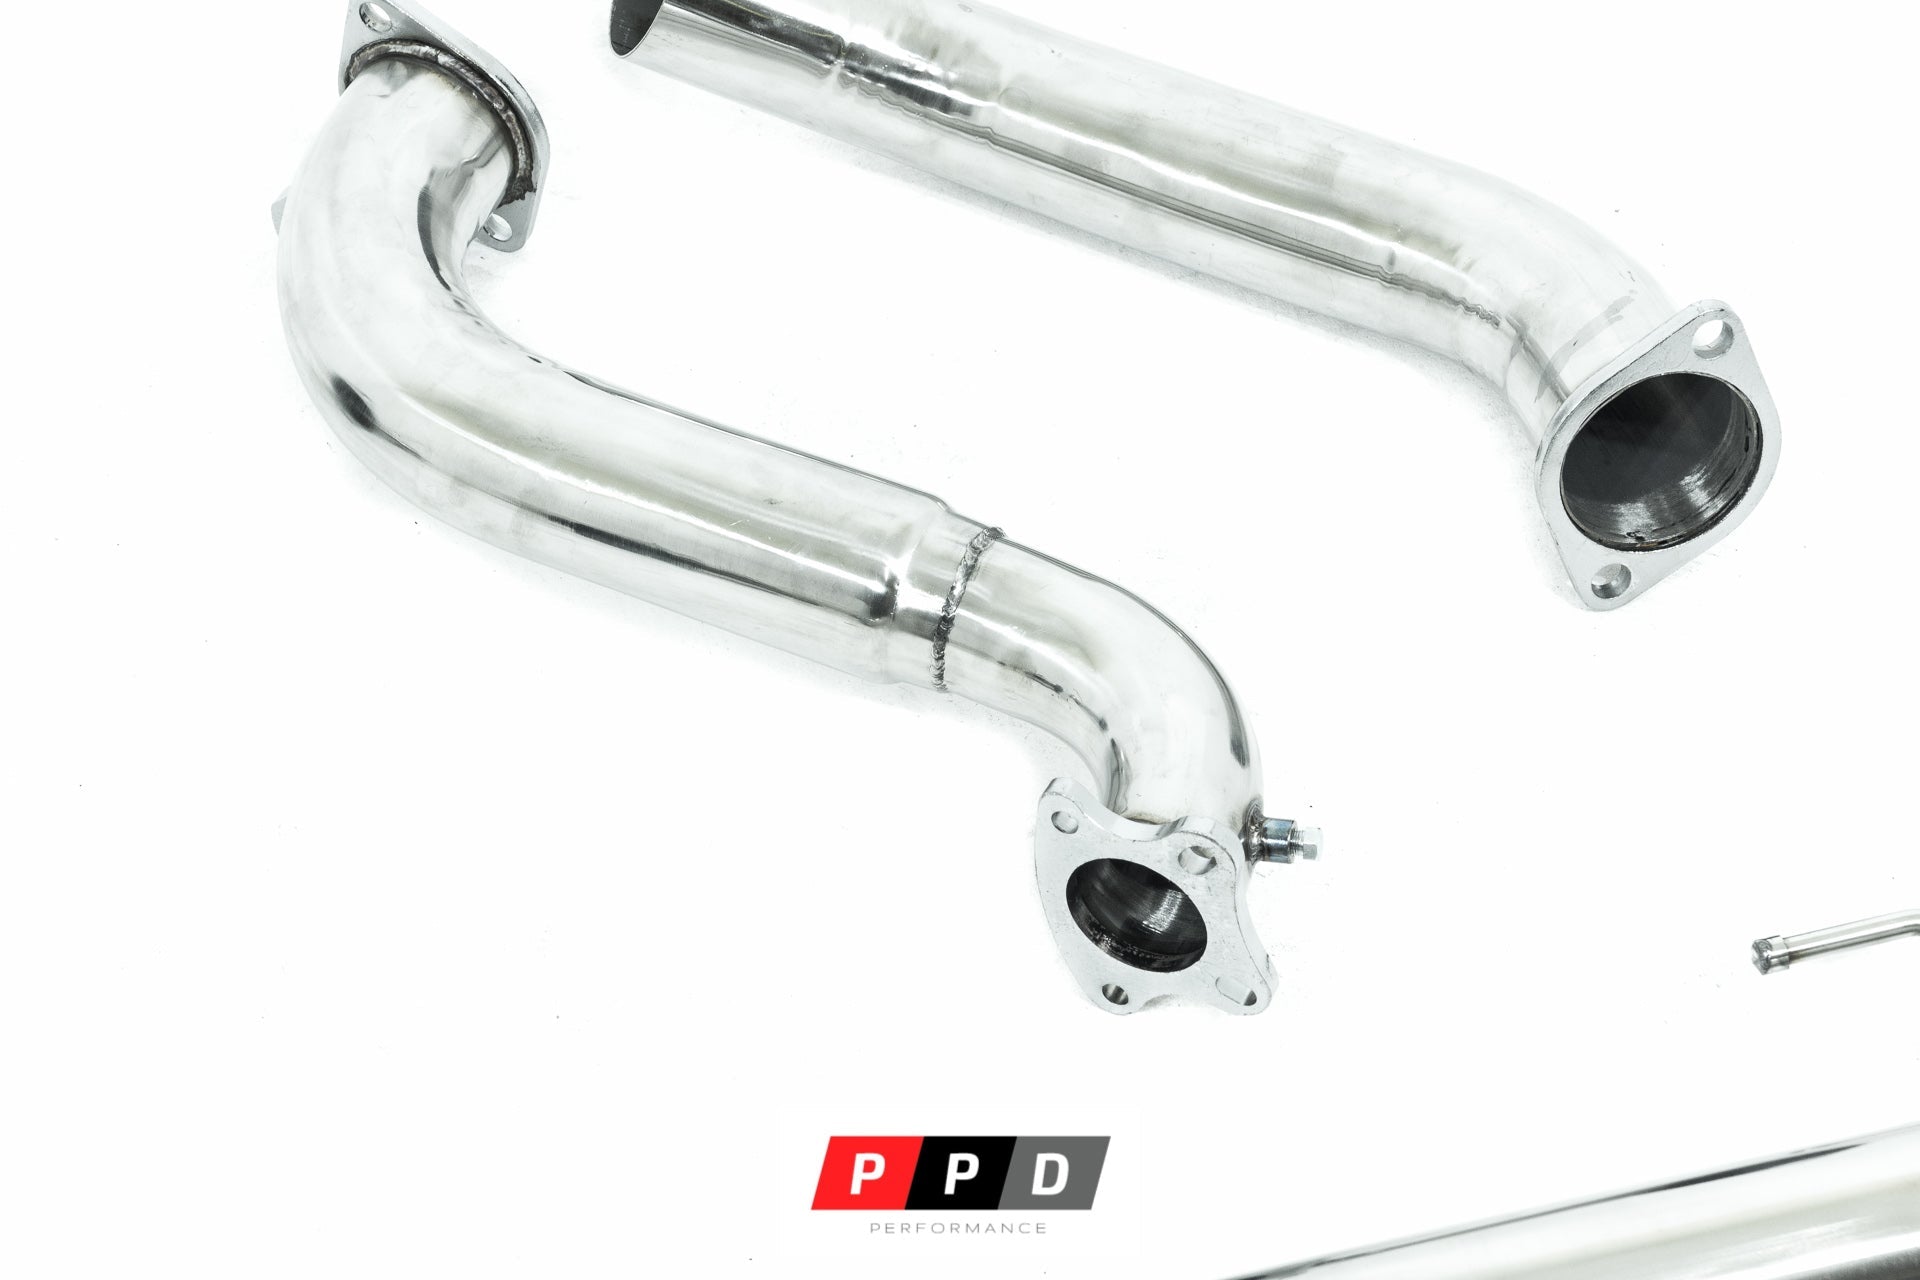 PPD Performance - Isuzu D - MAX (2012 - 2016) 3L Turbo Diesel 3' Stainless Steel Turbo Back Exhaust - 4X4OC™ | 4x4 Offroad Centre